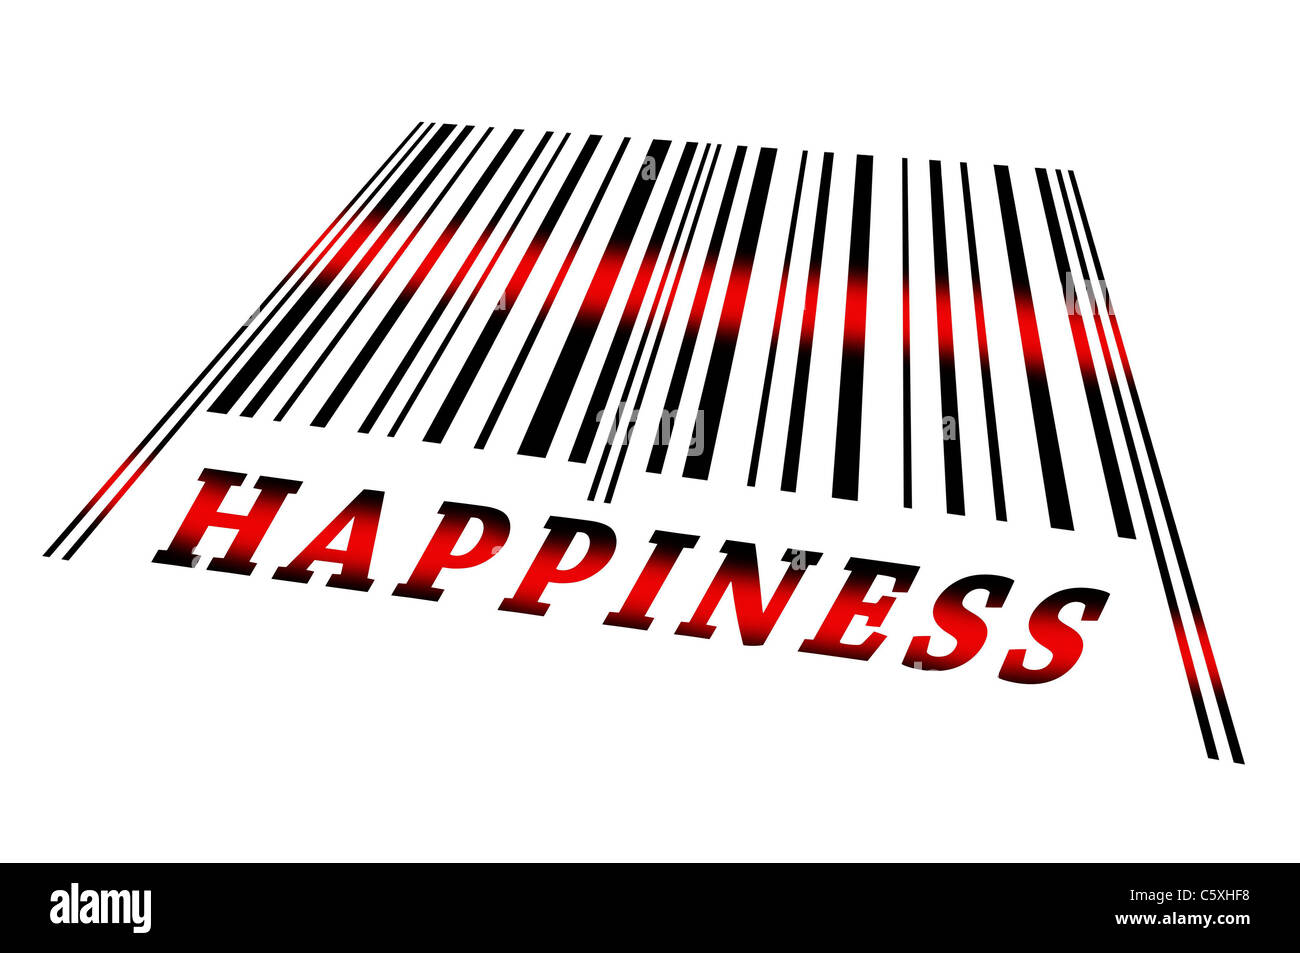 Happiness word on barcode scanned Stock Photo